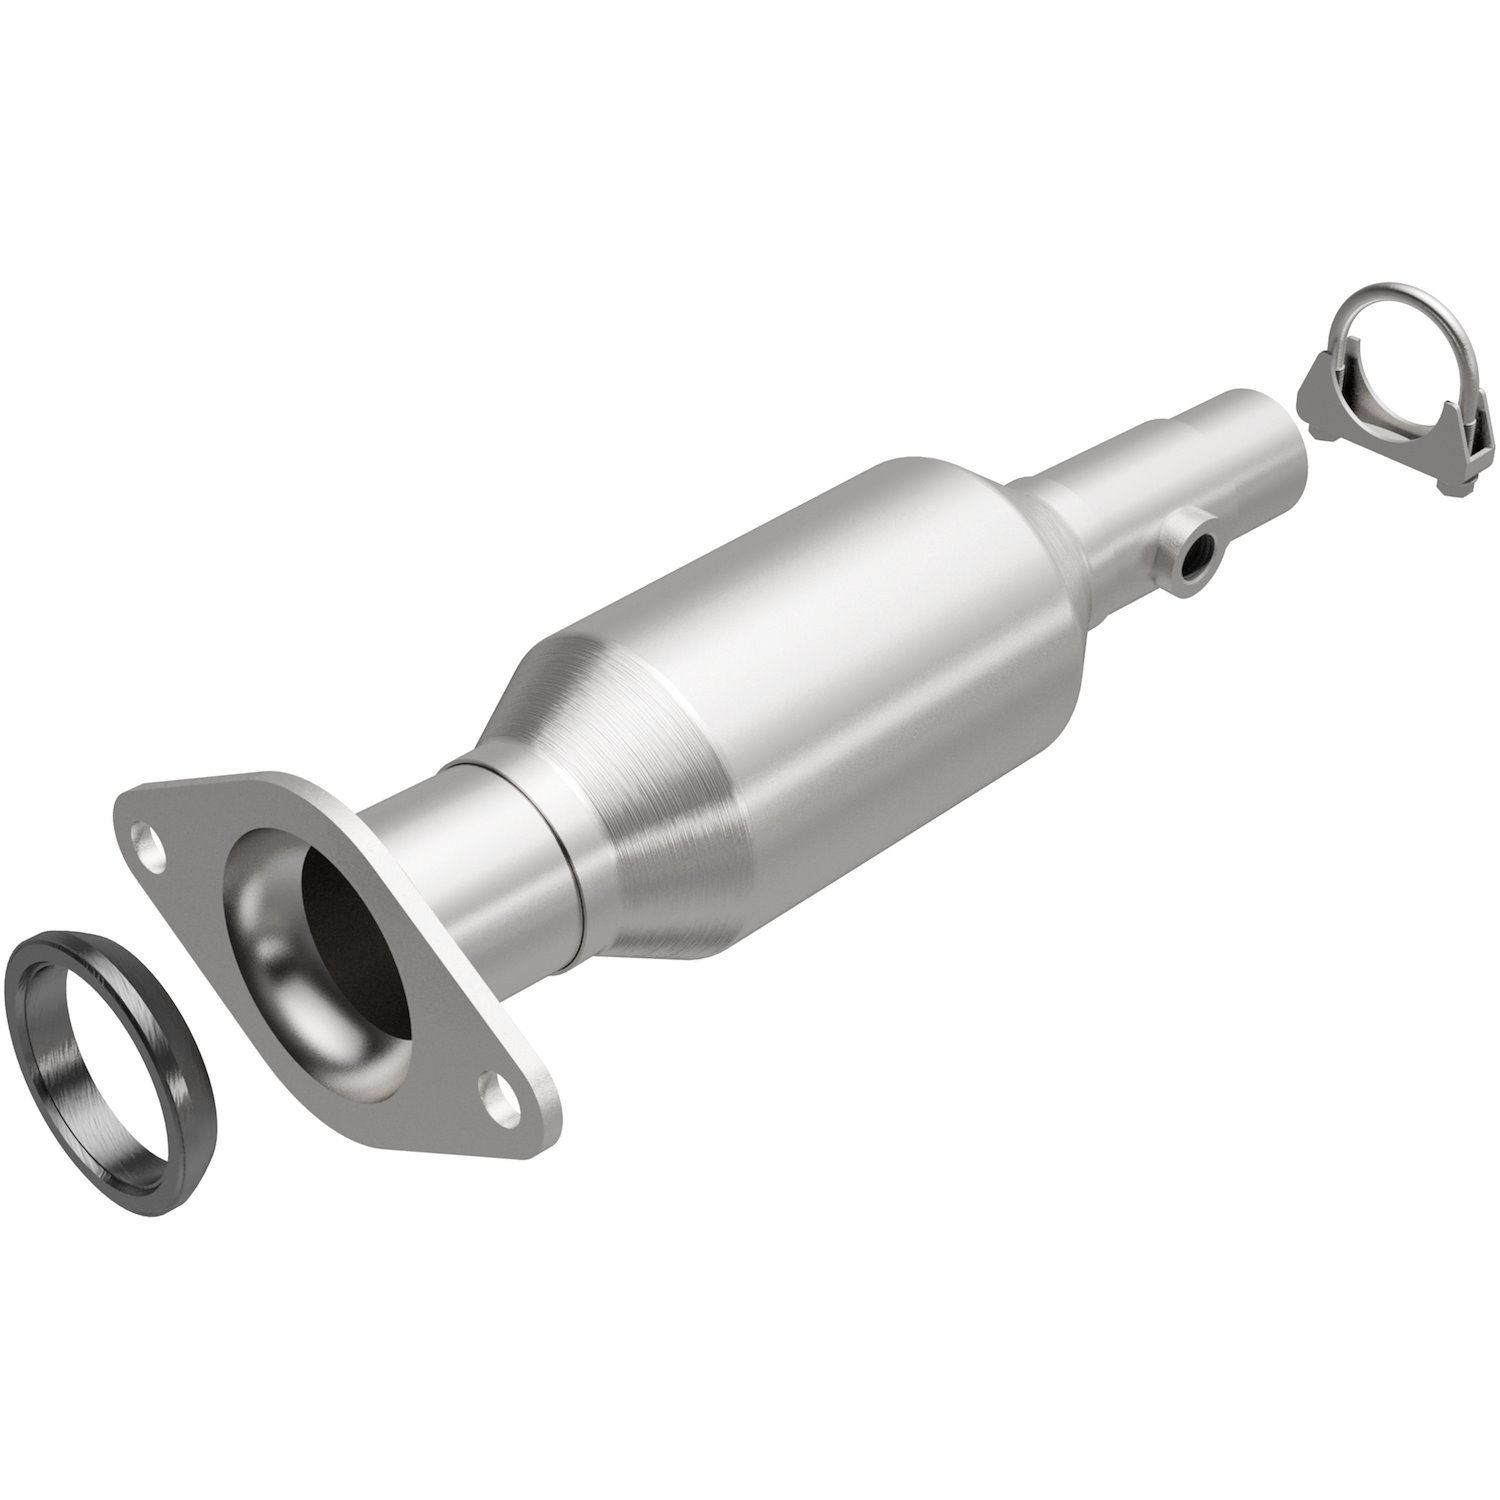 2001-2003 Toyota Prius OEM Grade Federal / EPA Compliant Direct-Fit Catalytic Converter